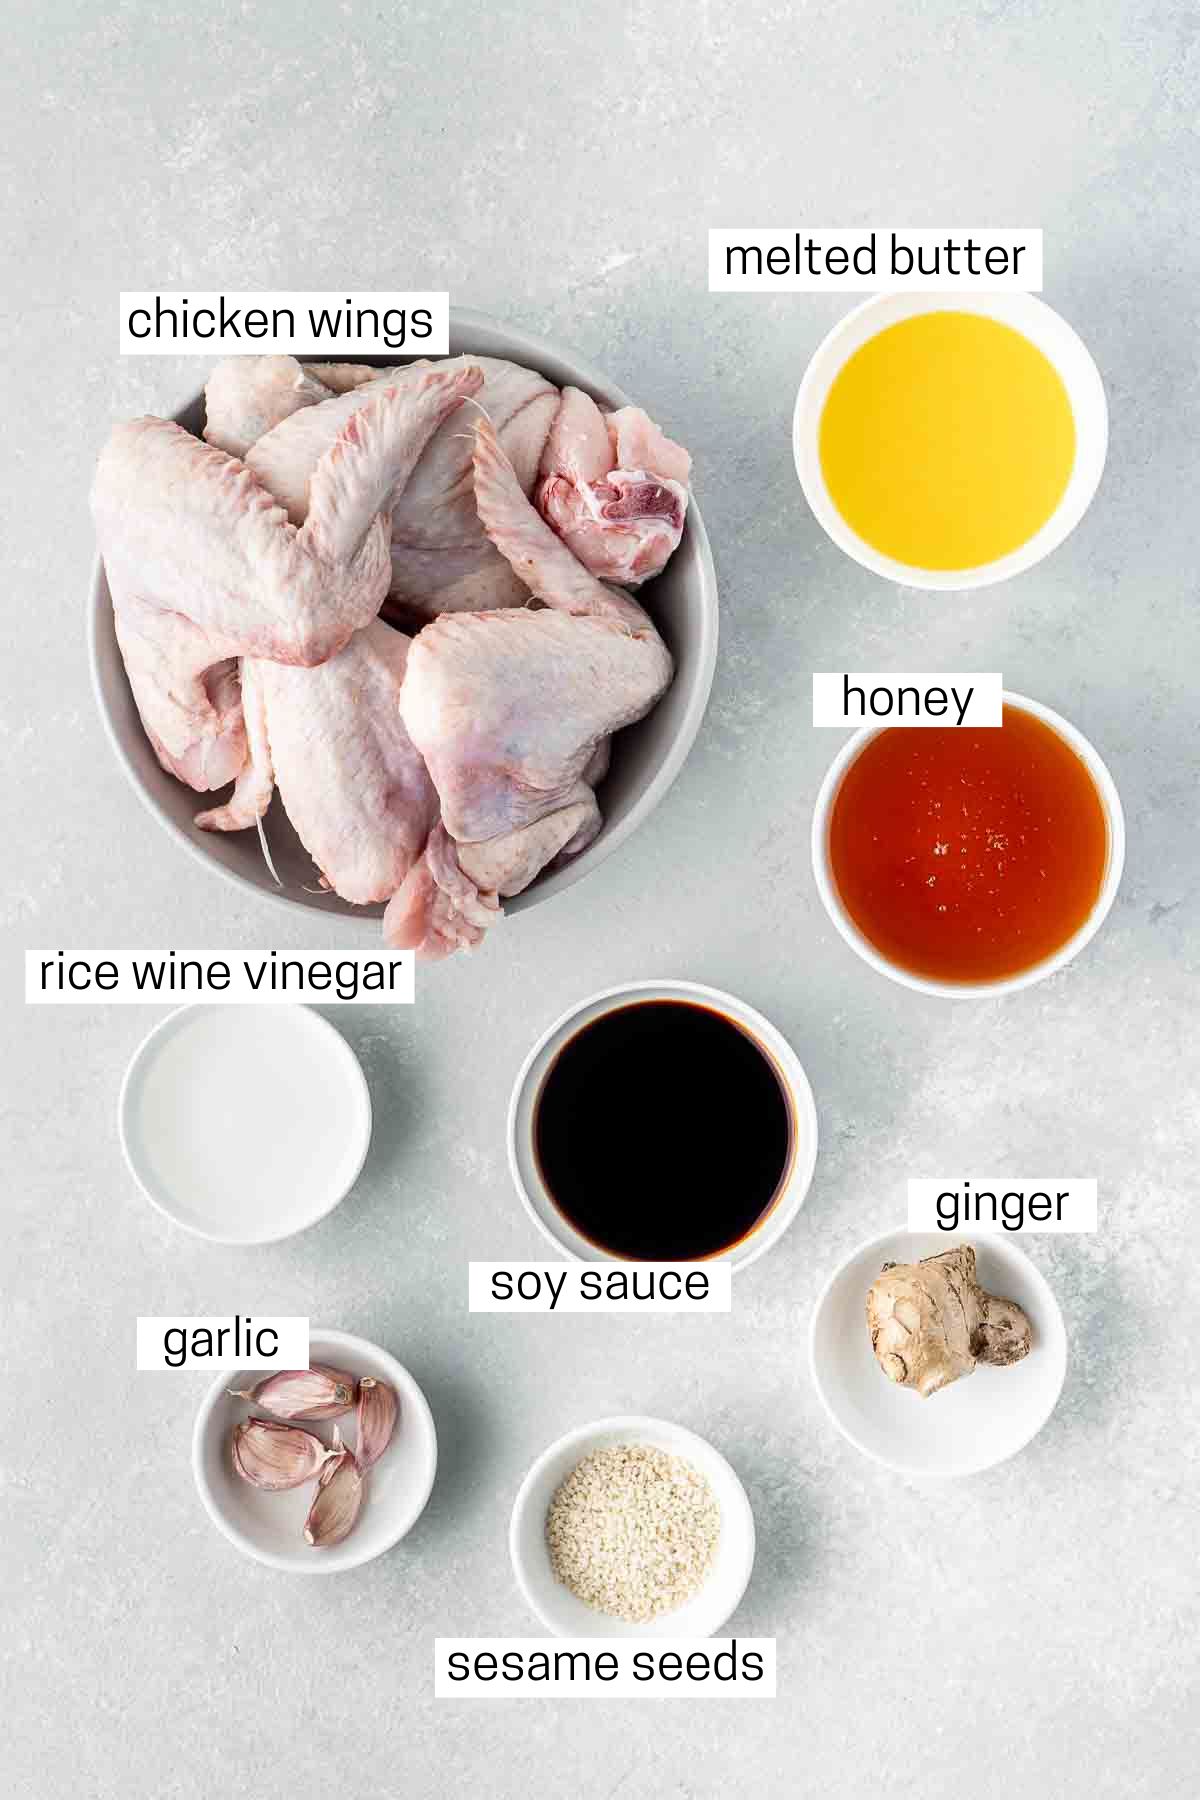 All ingredients needed to make honey garlic chicken wings laid out in small bowls.